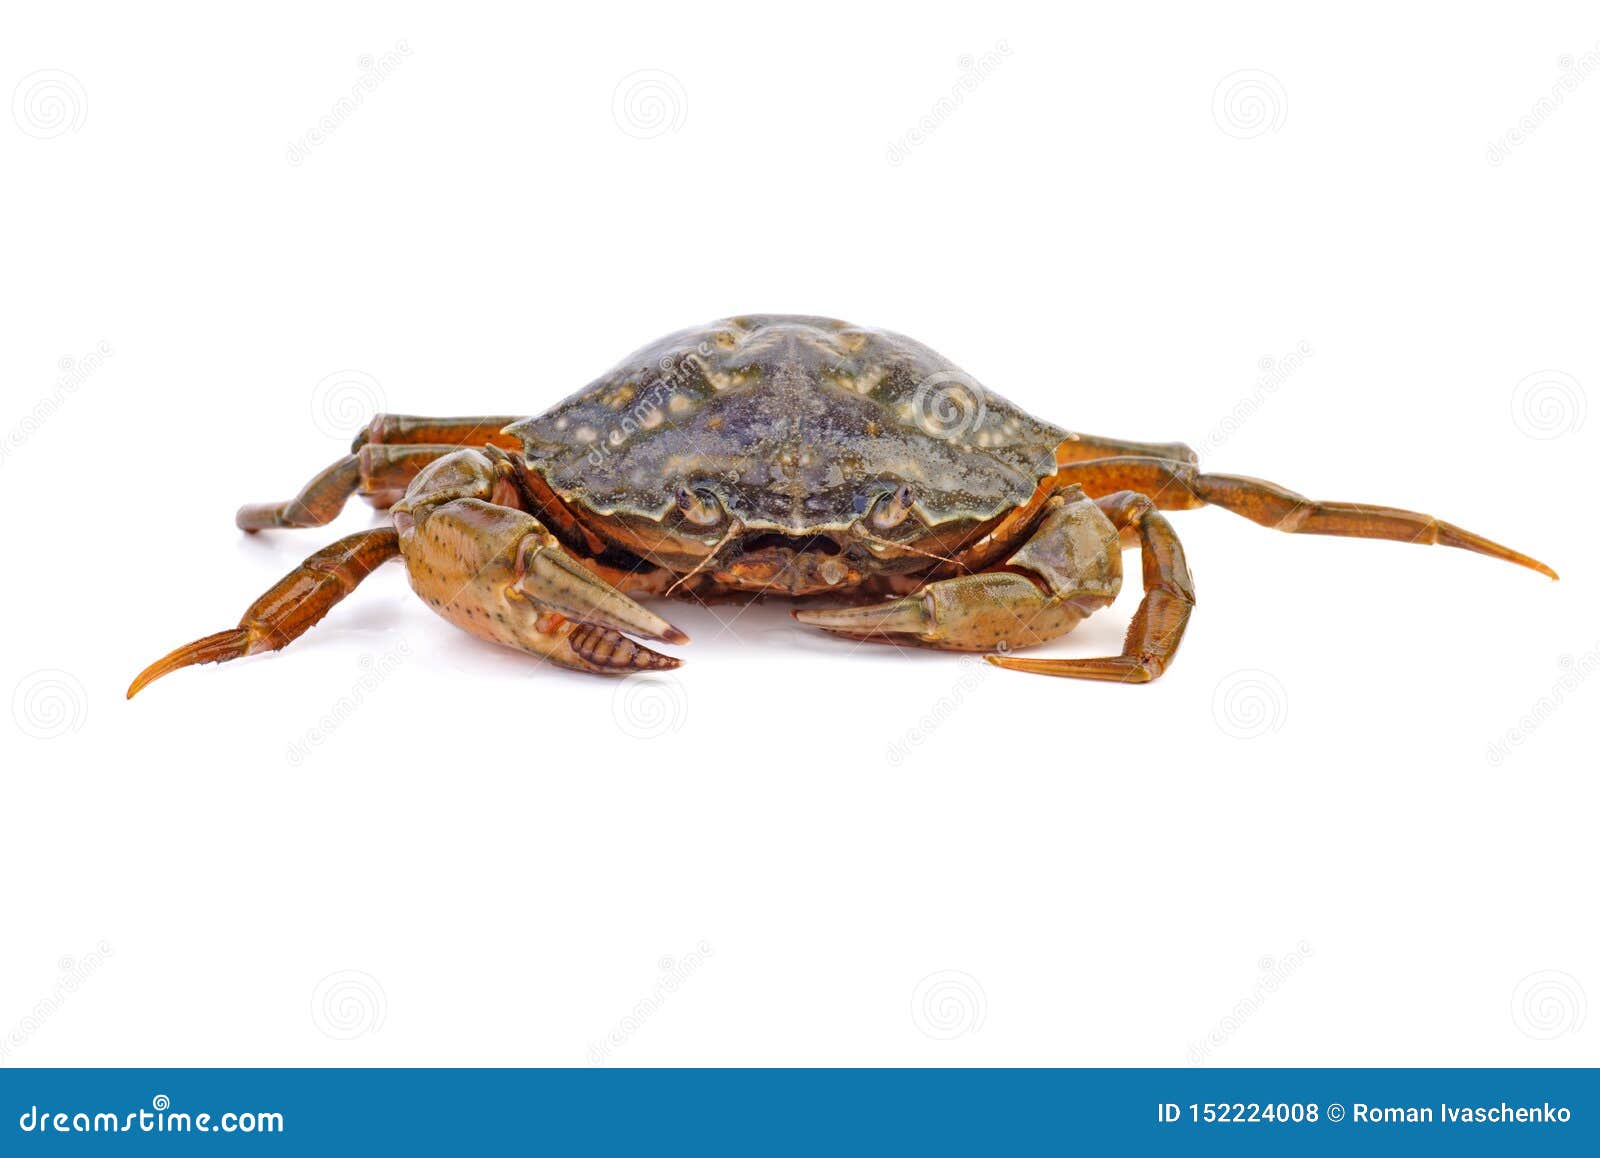 Live Crab on a White Background Stock Photo - Image of shell, life ...